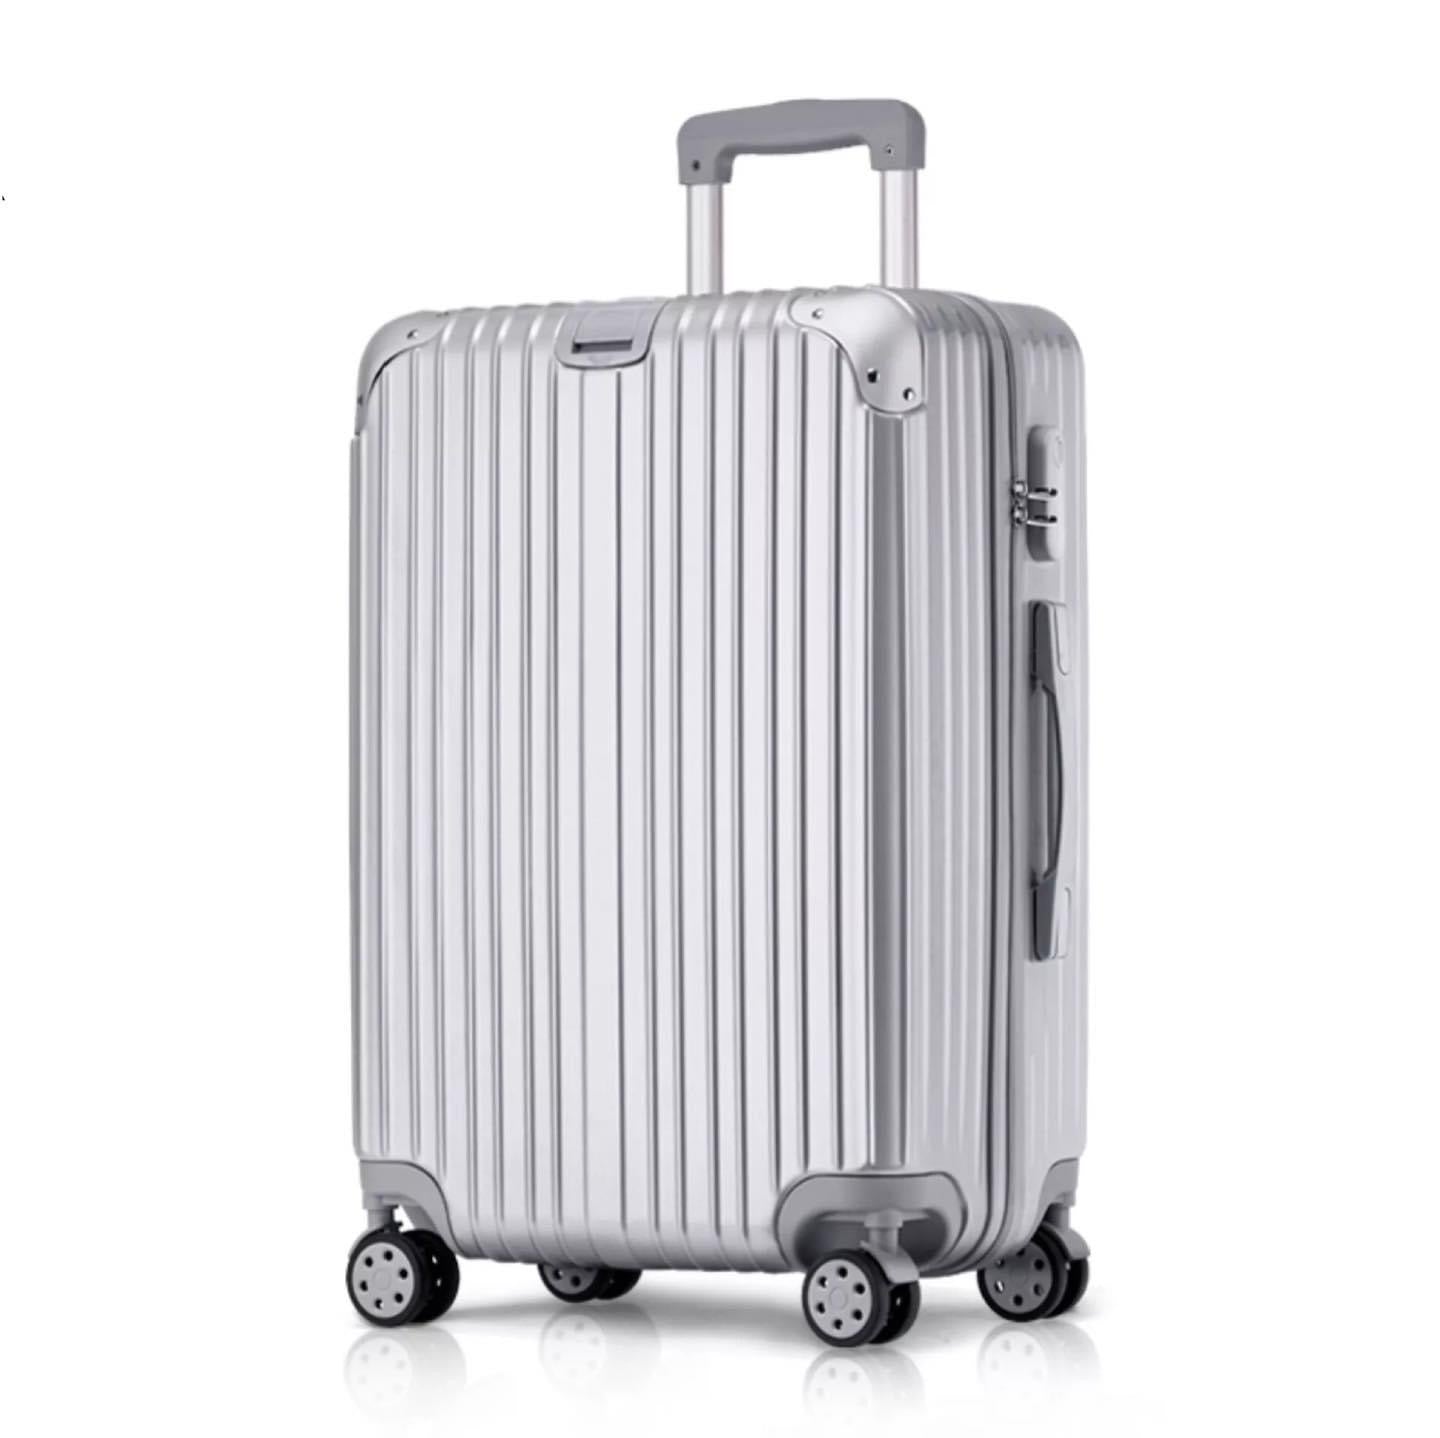 24" Silver Aluminium Framed Hard Shell Without Zipper TSA Luggage Bag With Spinner Wheel